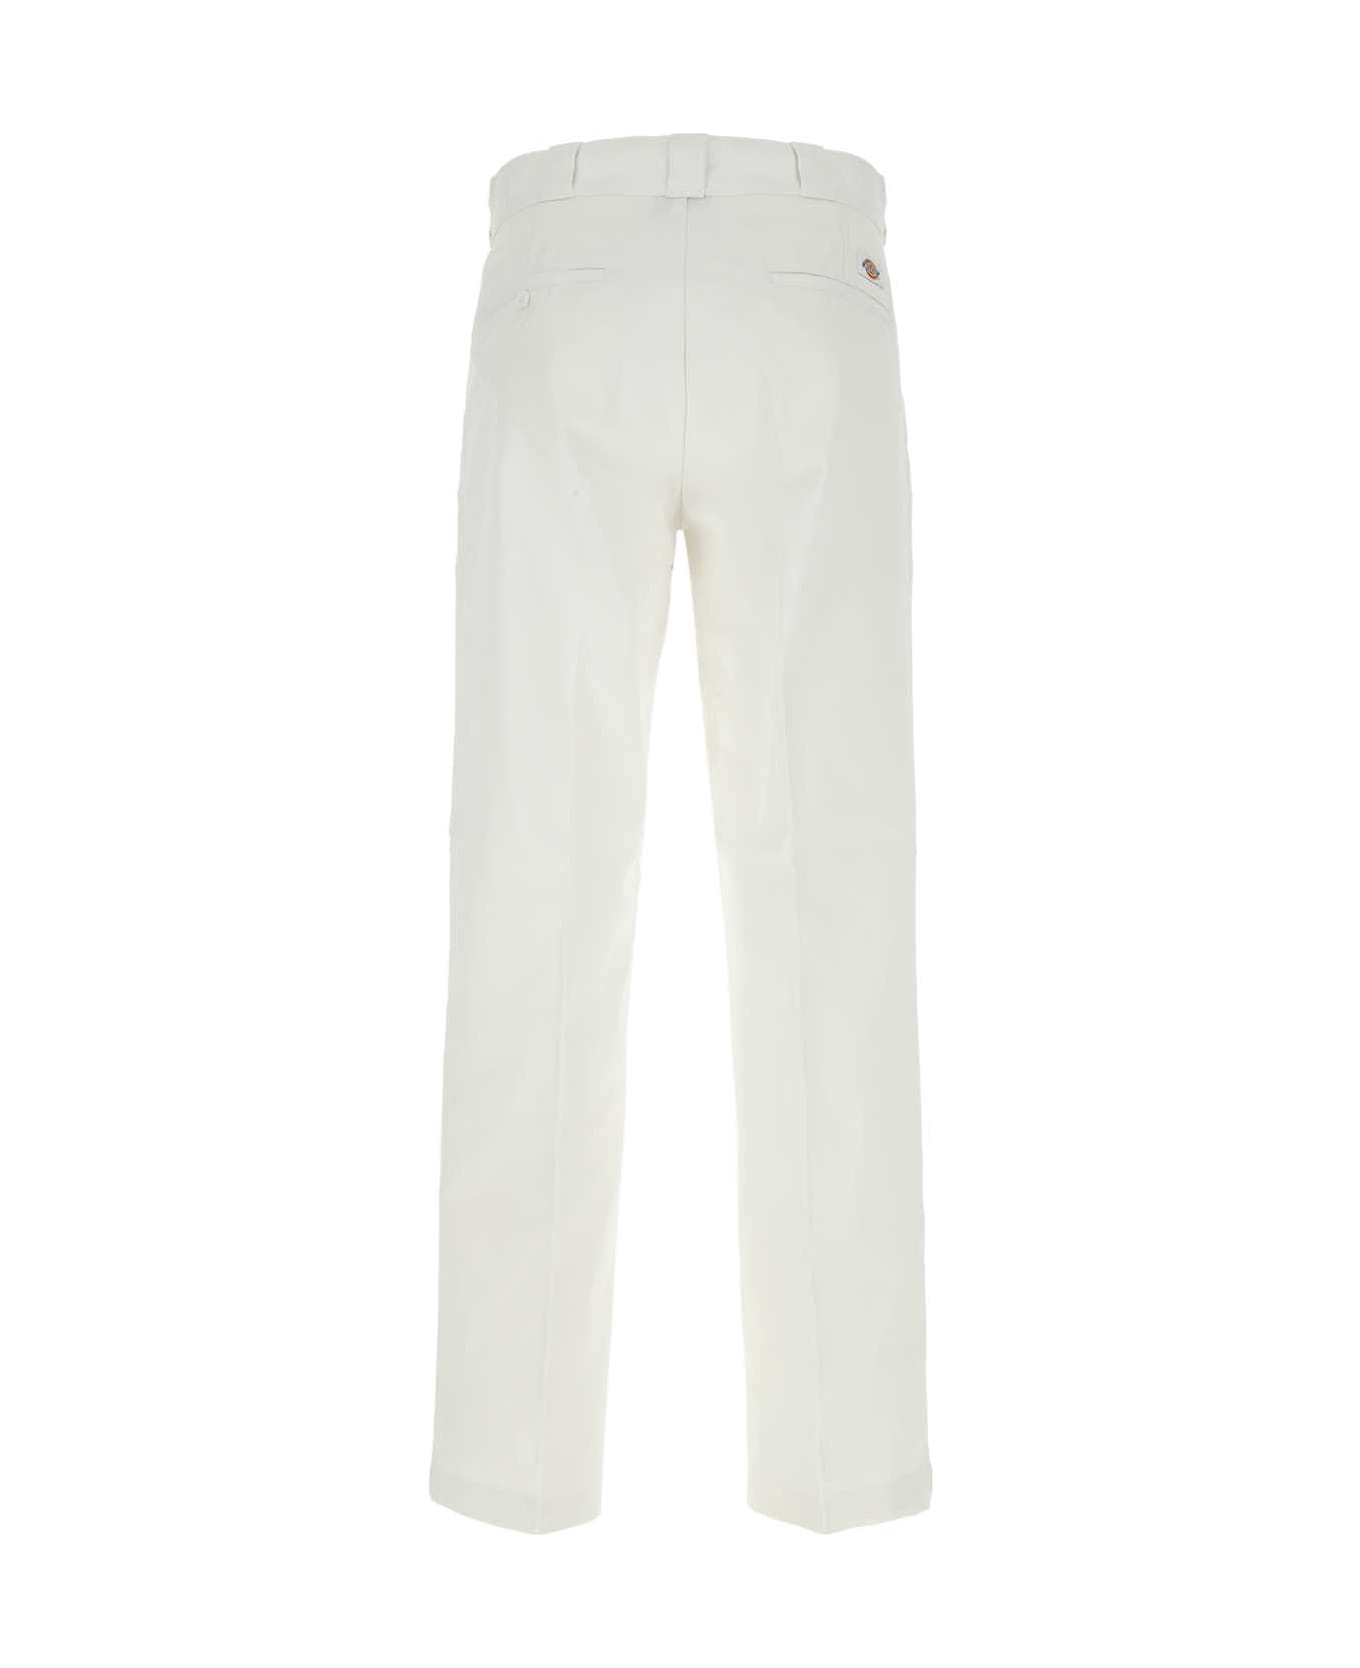 Dickies White Polyester Blend Pant - WHX1 ボトムス